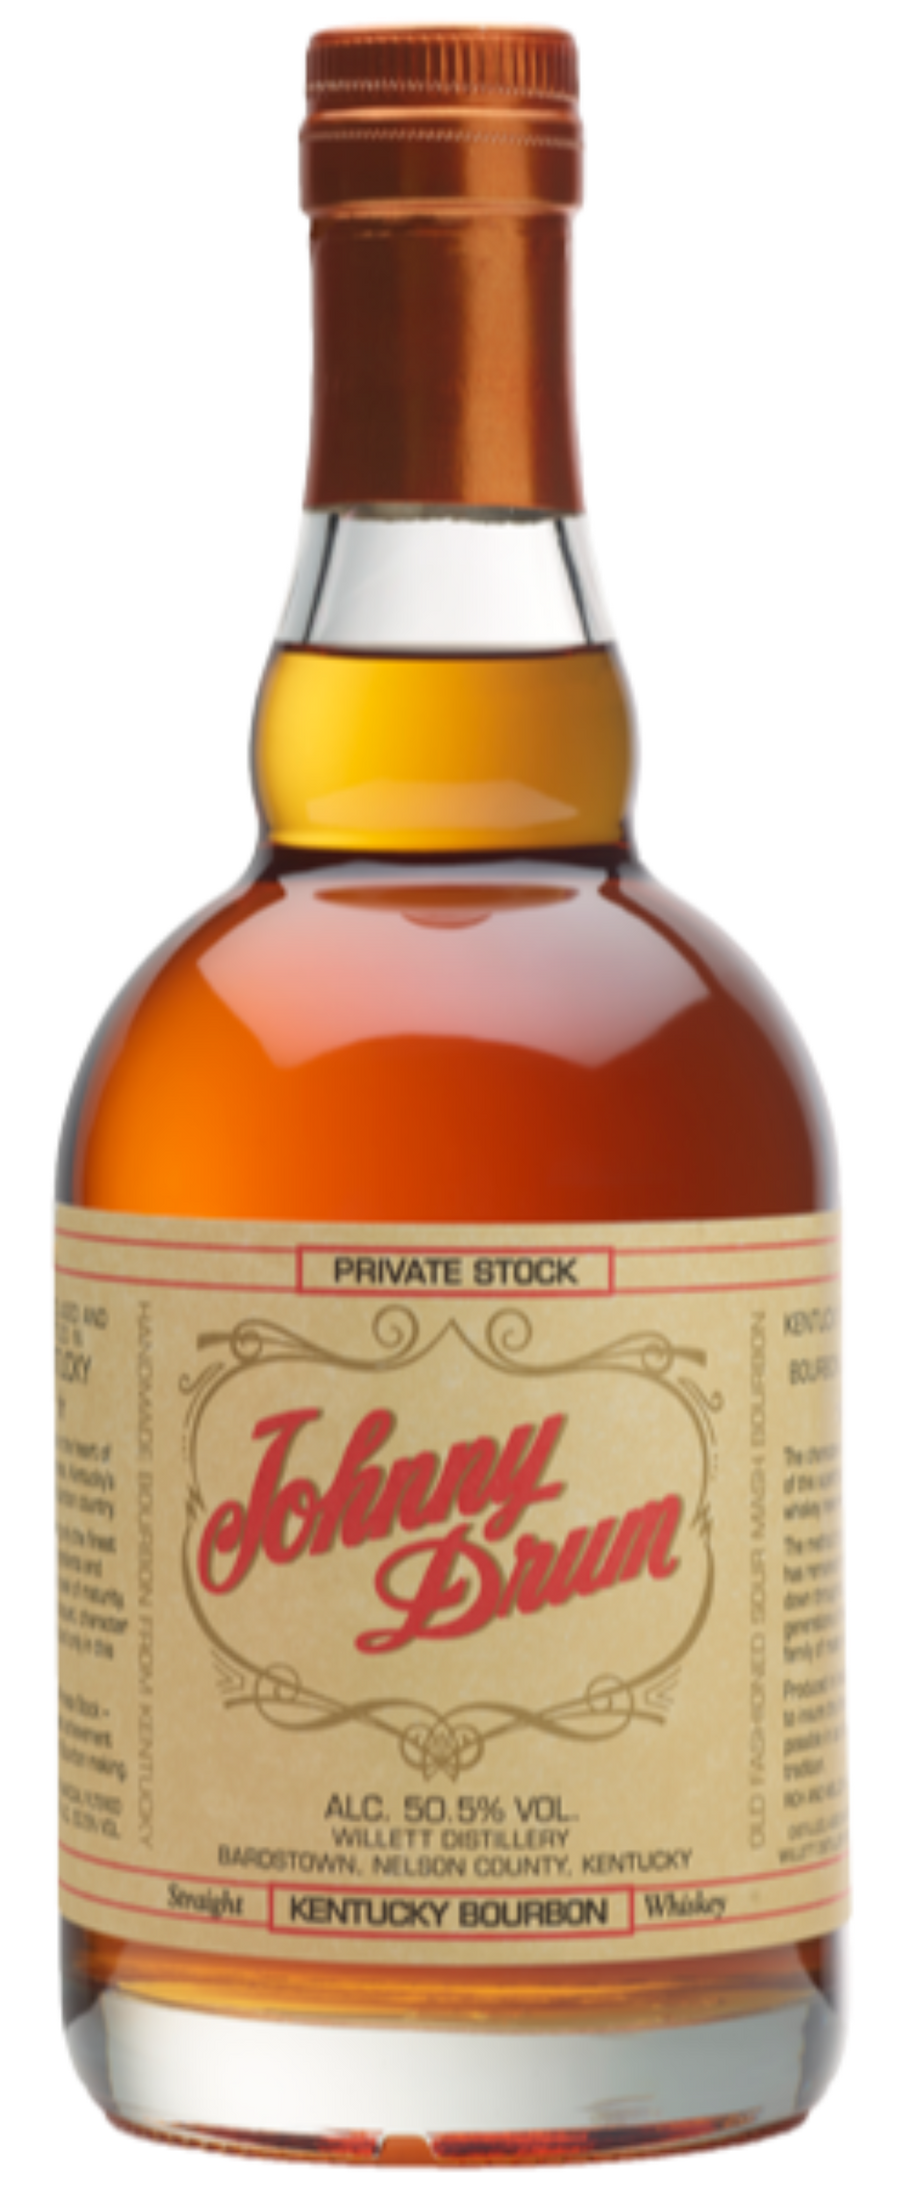 Johnny Drum Private Stock Bourbon American Whiskey